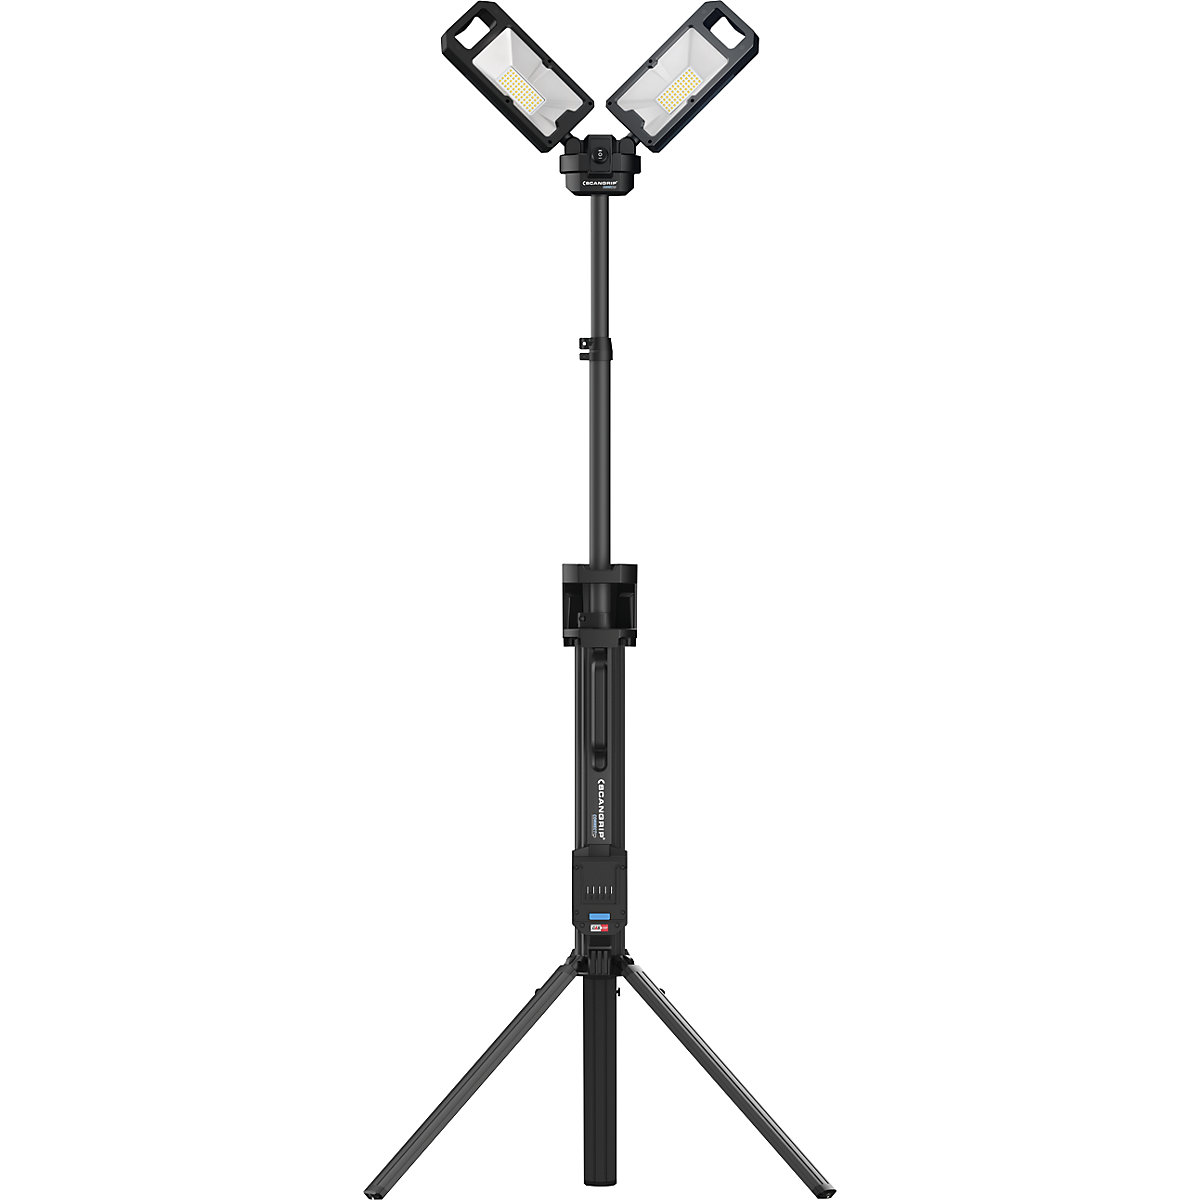 LED-bouwlamp TOWER 5 CONNECT – SCANGRIP